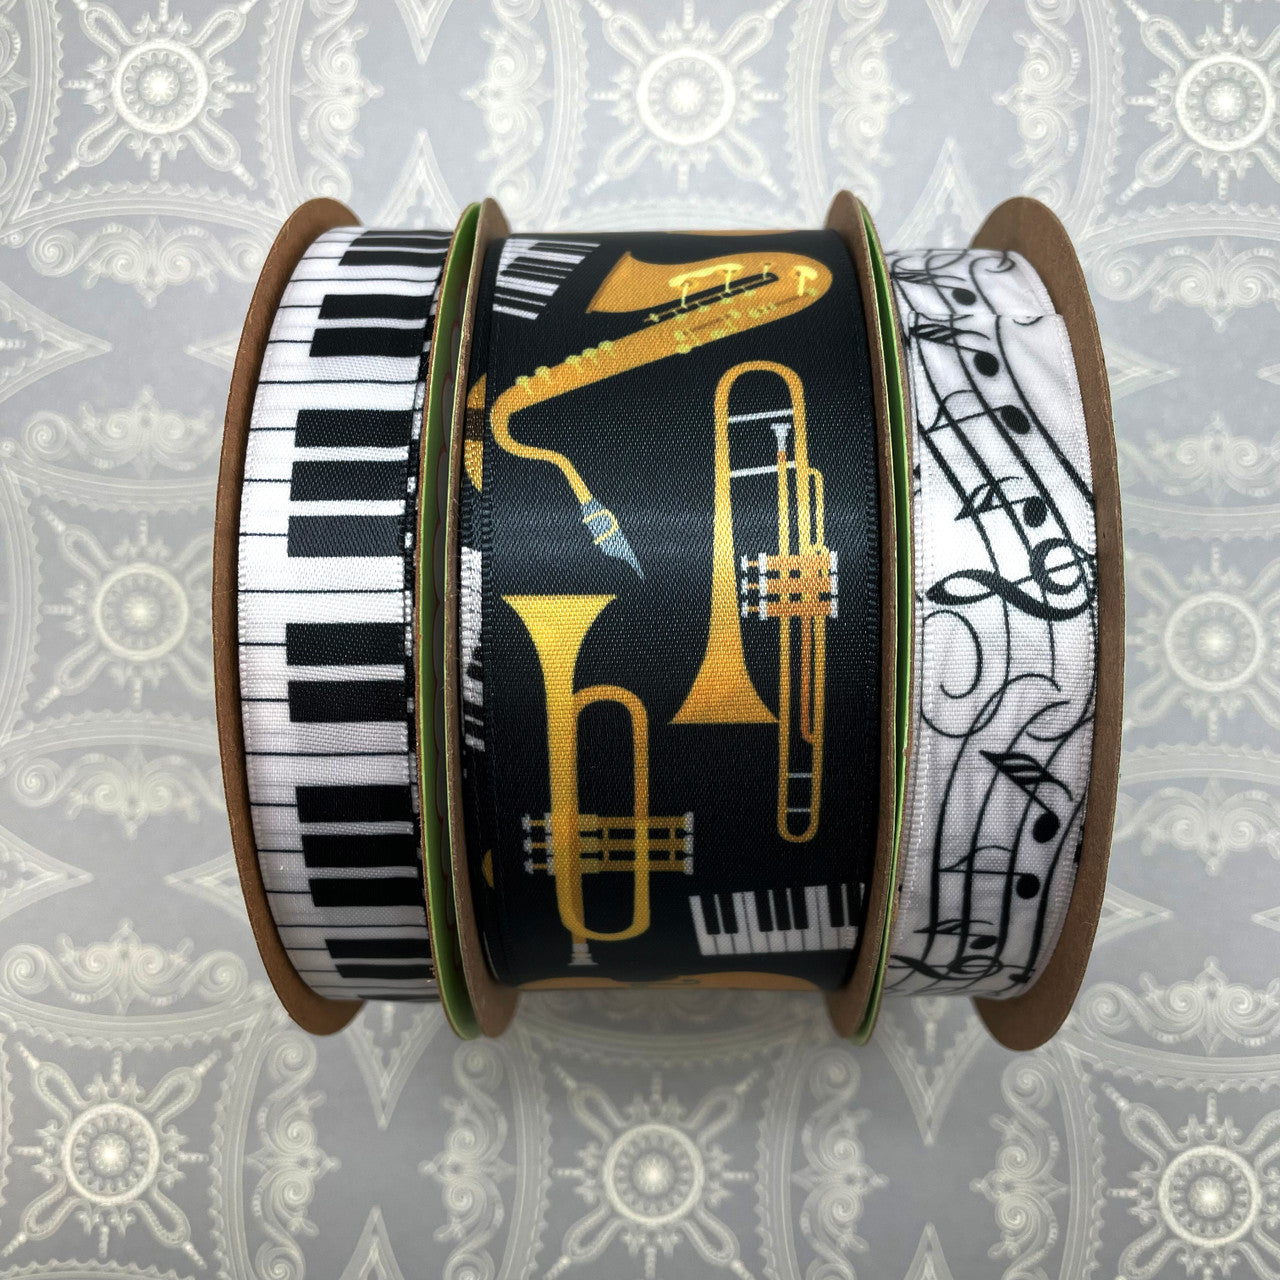 Pairing our Musical Instruments ribbon with our keyboard and music notes ribbons will make the perfect gift or music themed party decor!